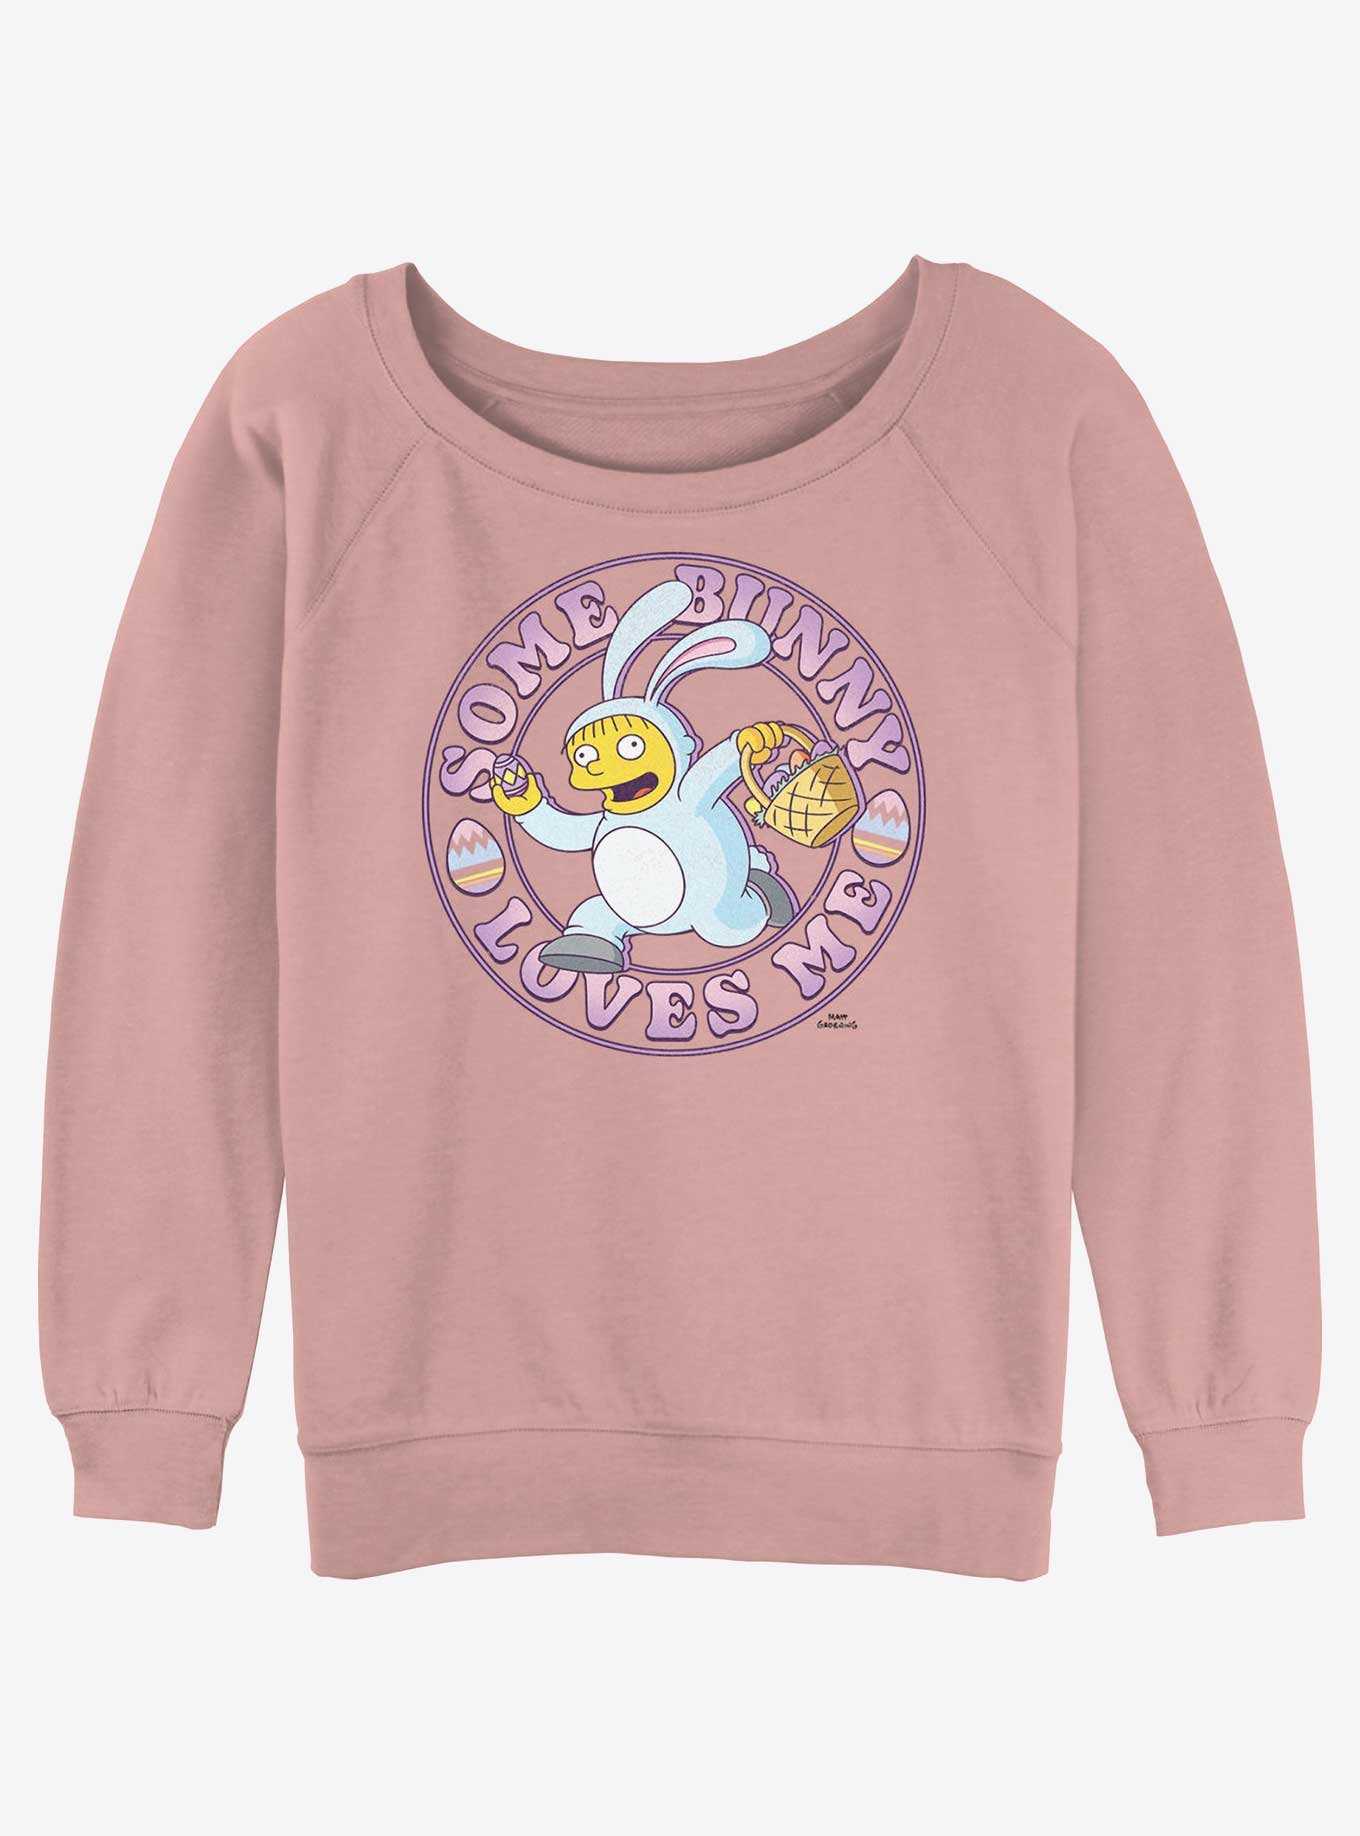 The Simpsons Some Bunny Loves Me Girls Slouchy Sweatshirt, , hi-res